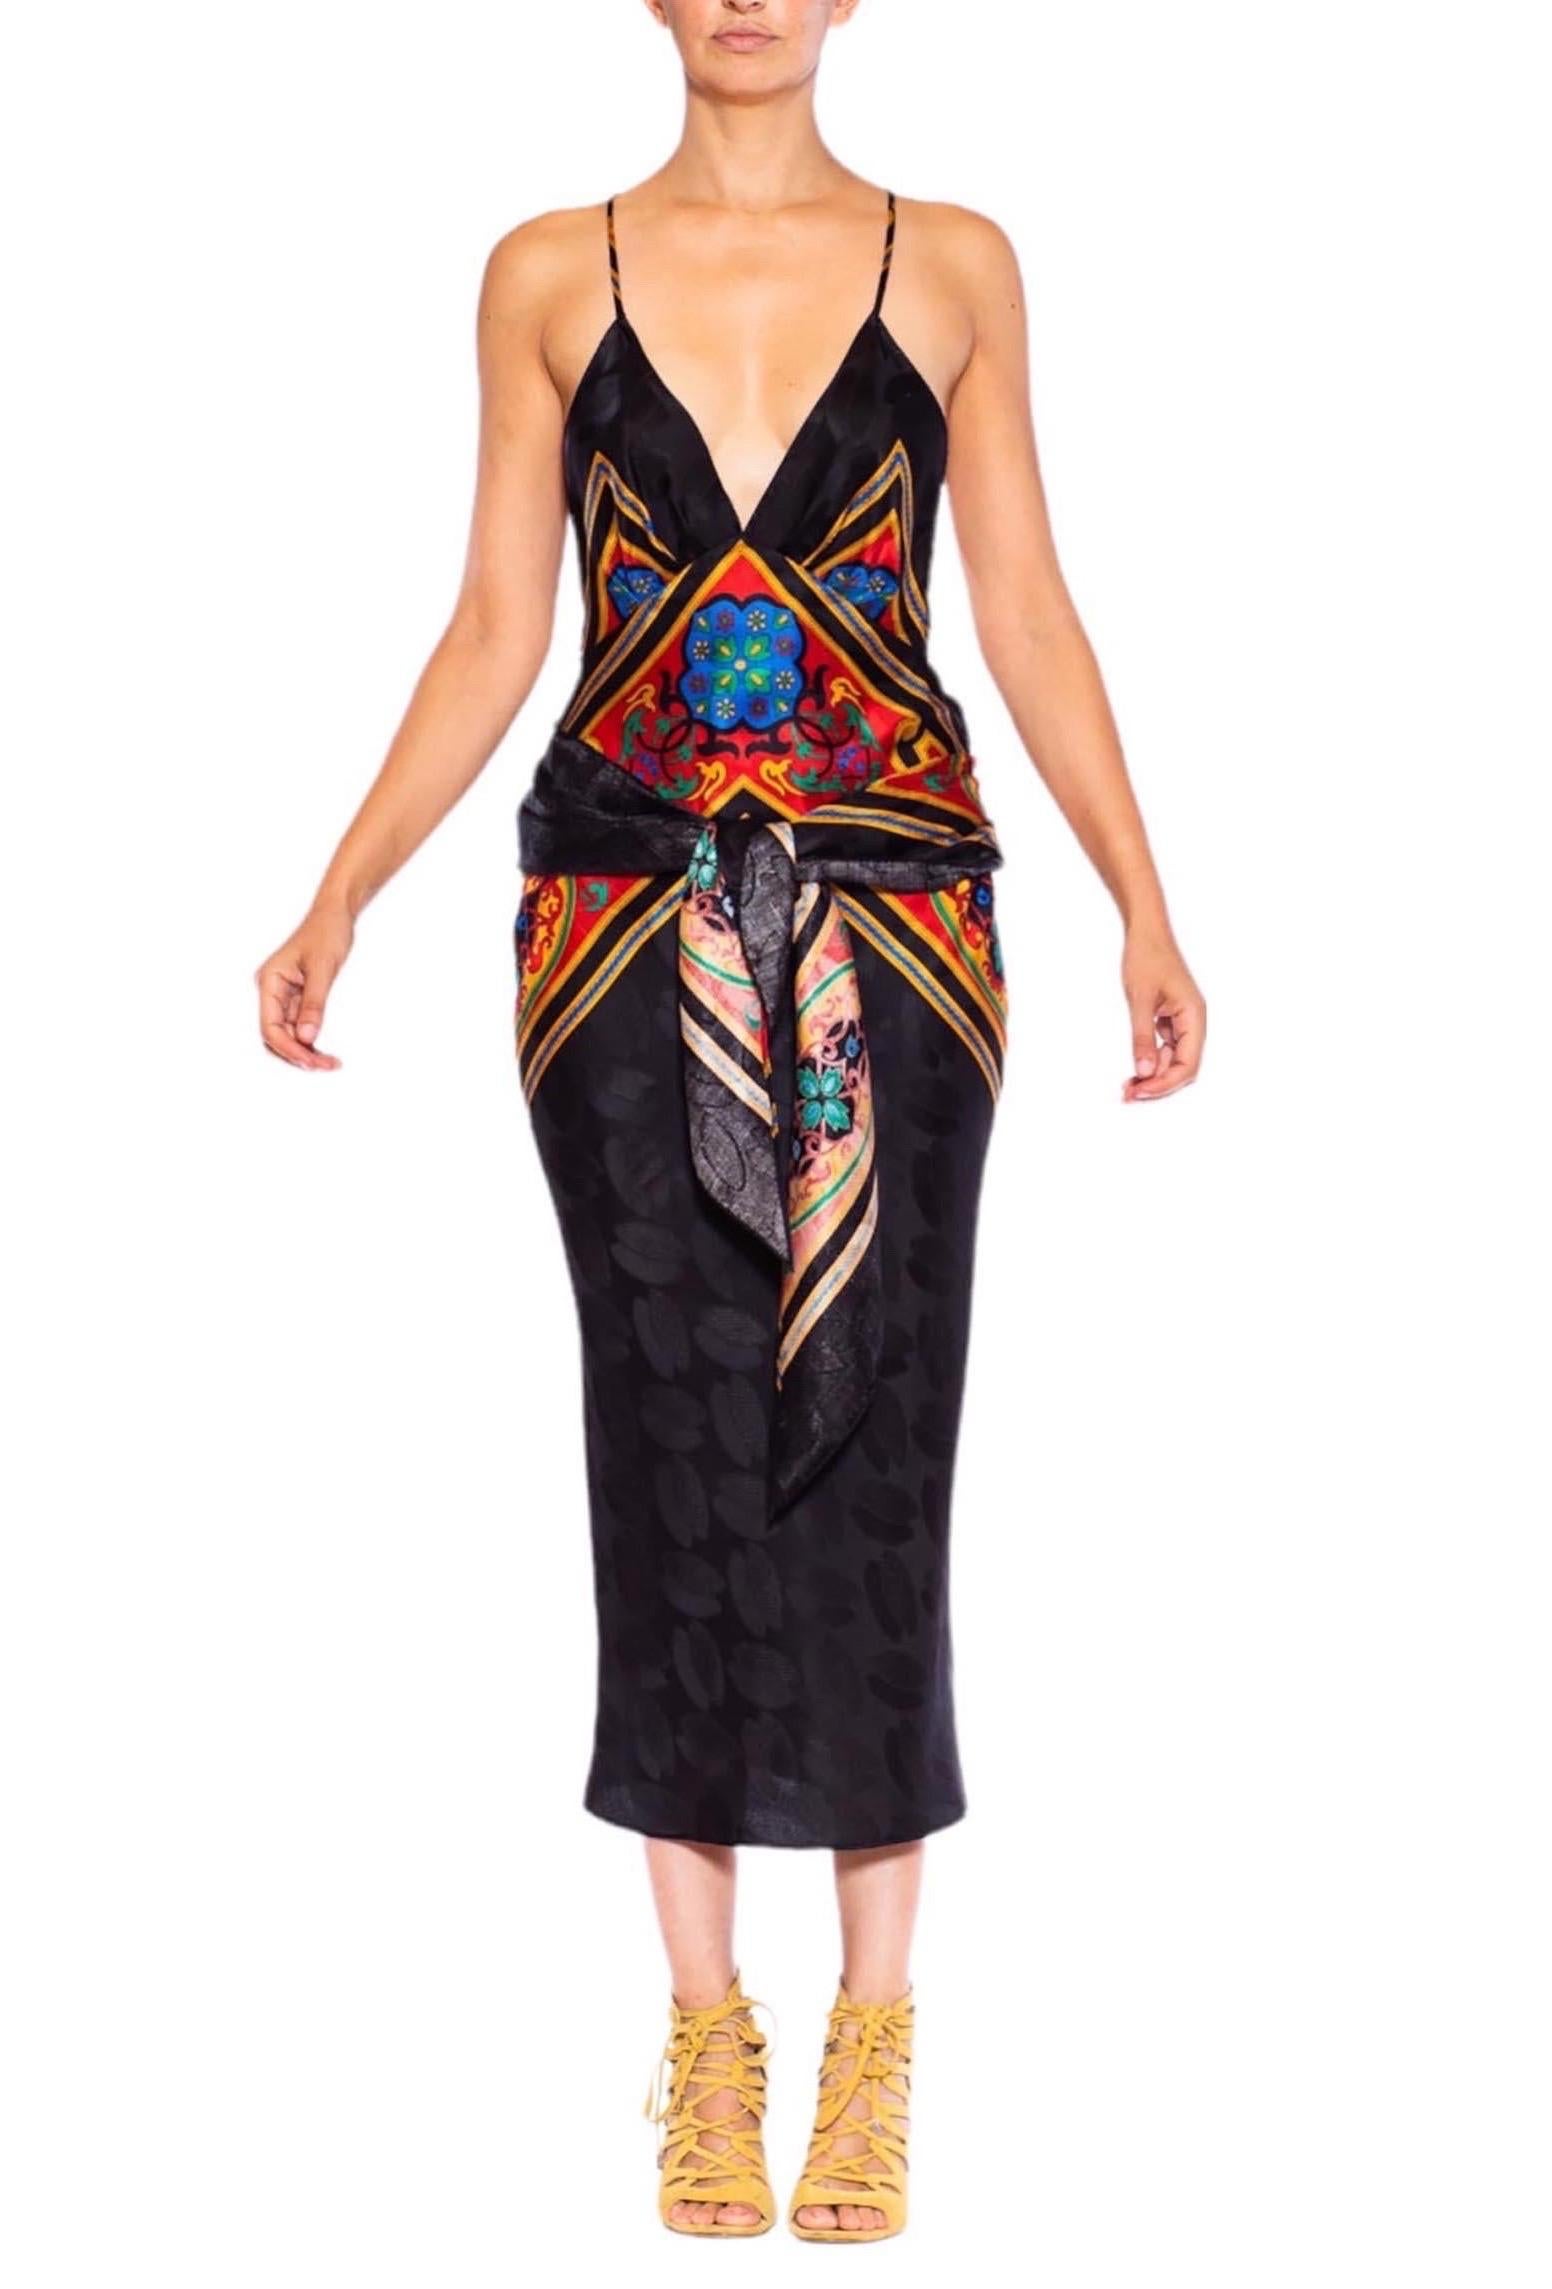 MORPHEW COLLECTION Black & Red Multi  Silk Sagittarius One Scarf Dress Made Fro For Sale 1